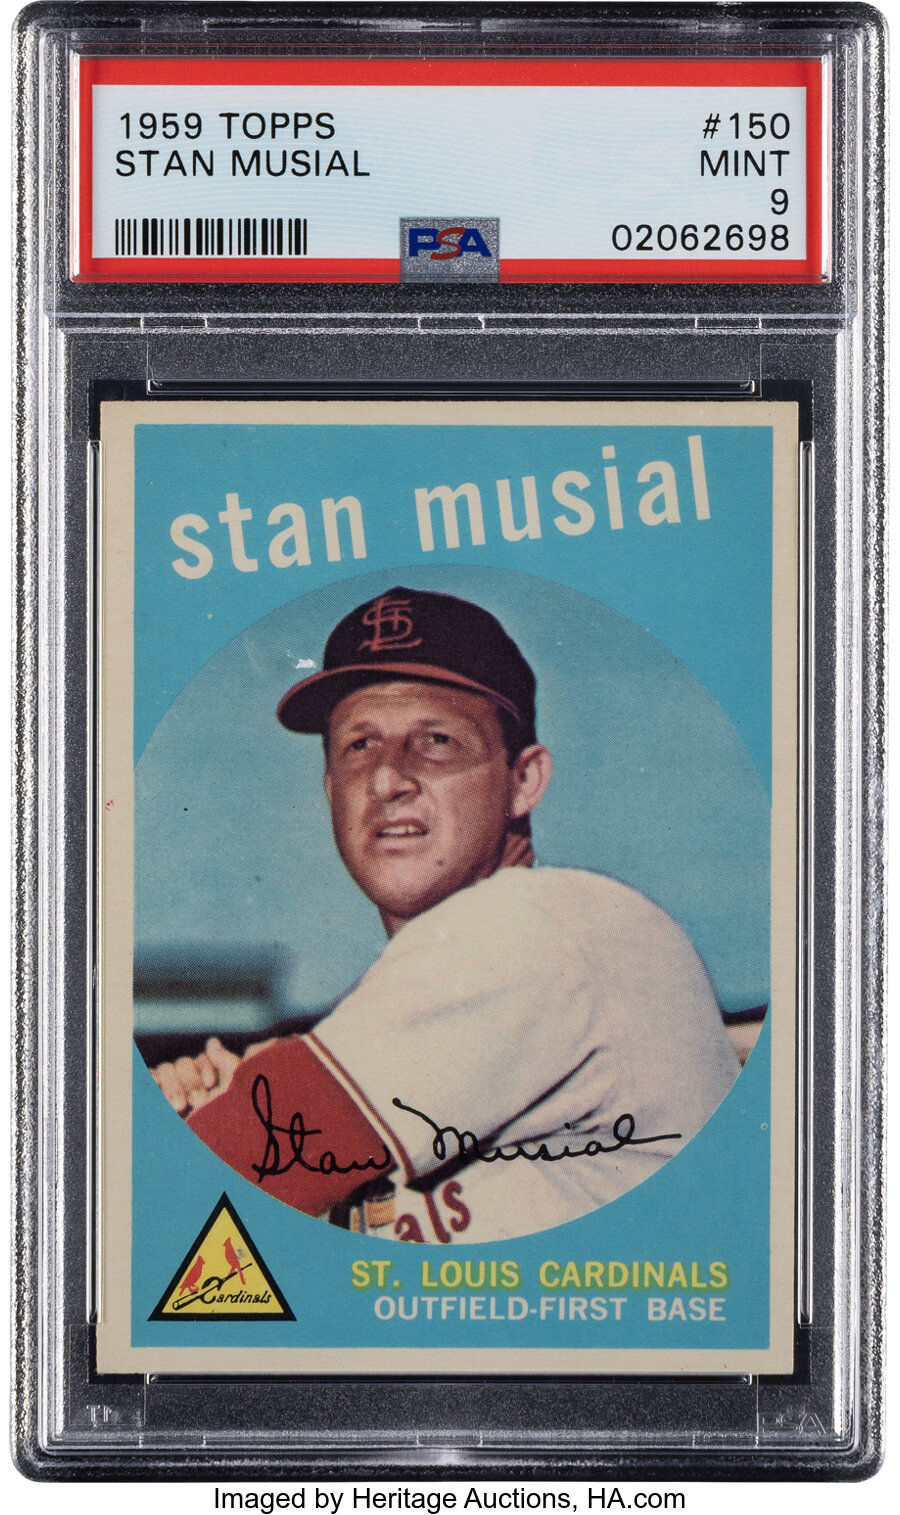 1959 Topps Stan Musial #150 PSA Mint 9 - None Higher!